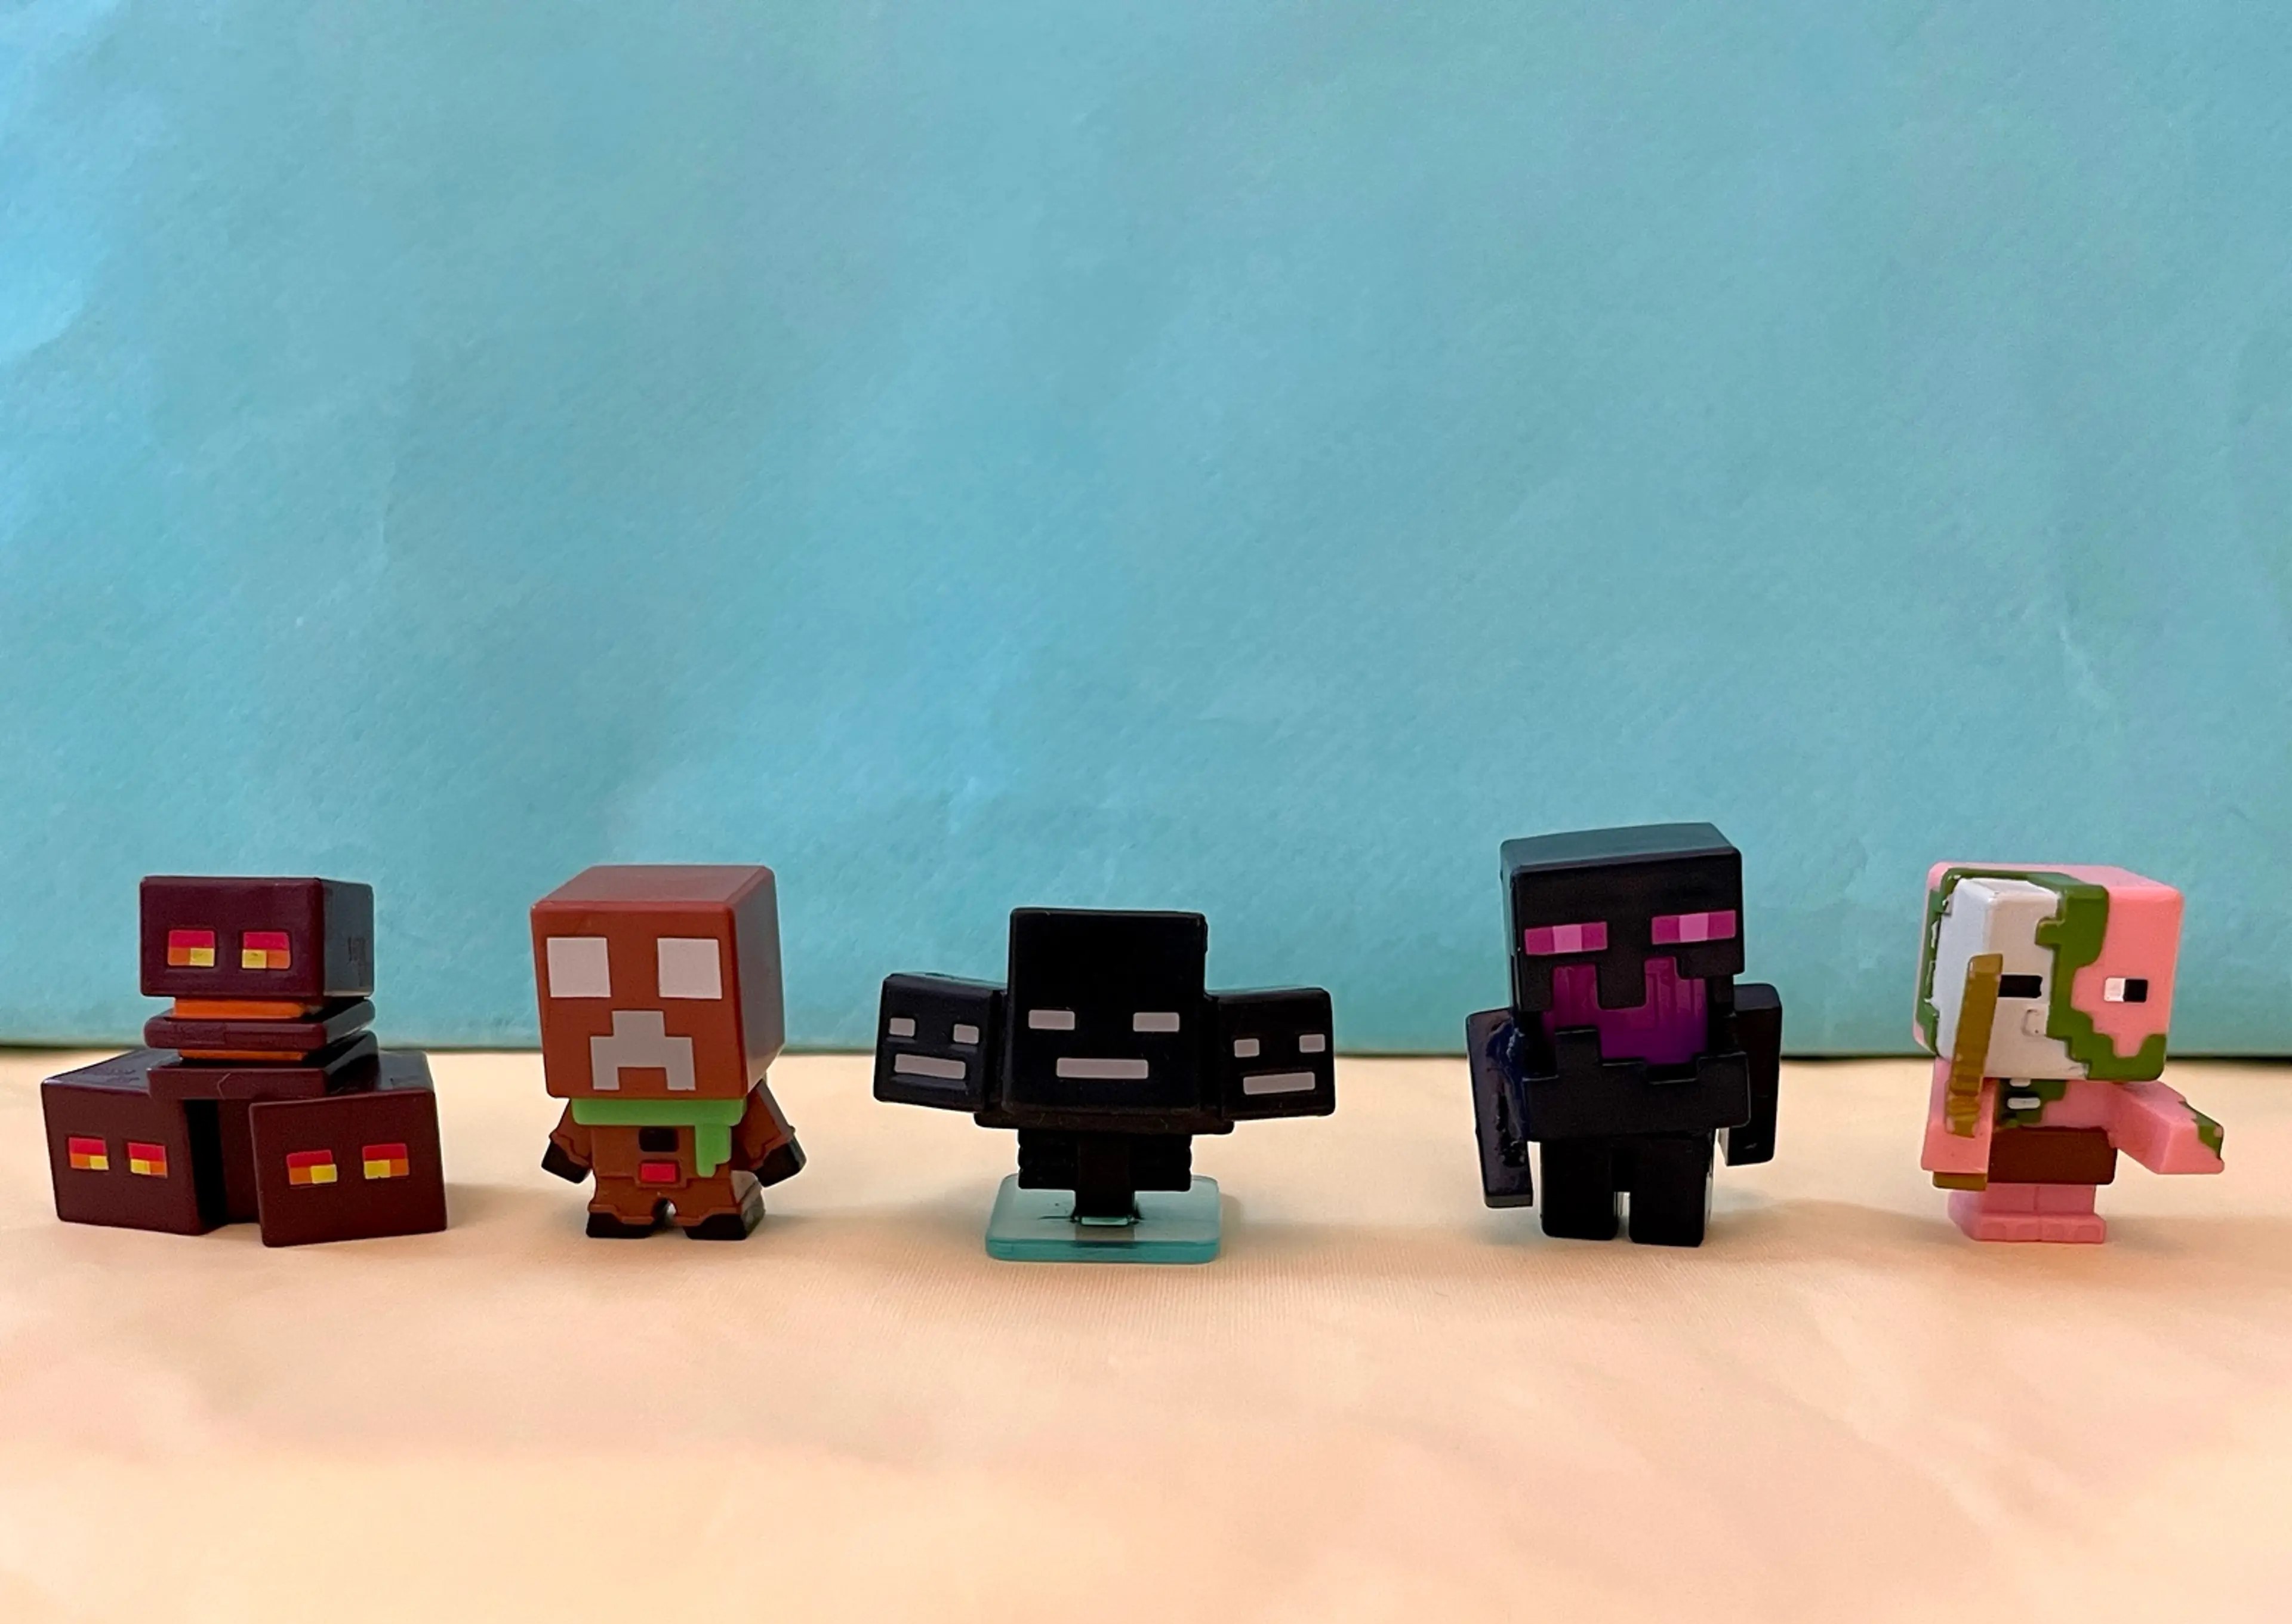 The Top 5 Rarest And Most Collectible Minecraft Mini Figures Revealed!